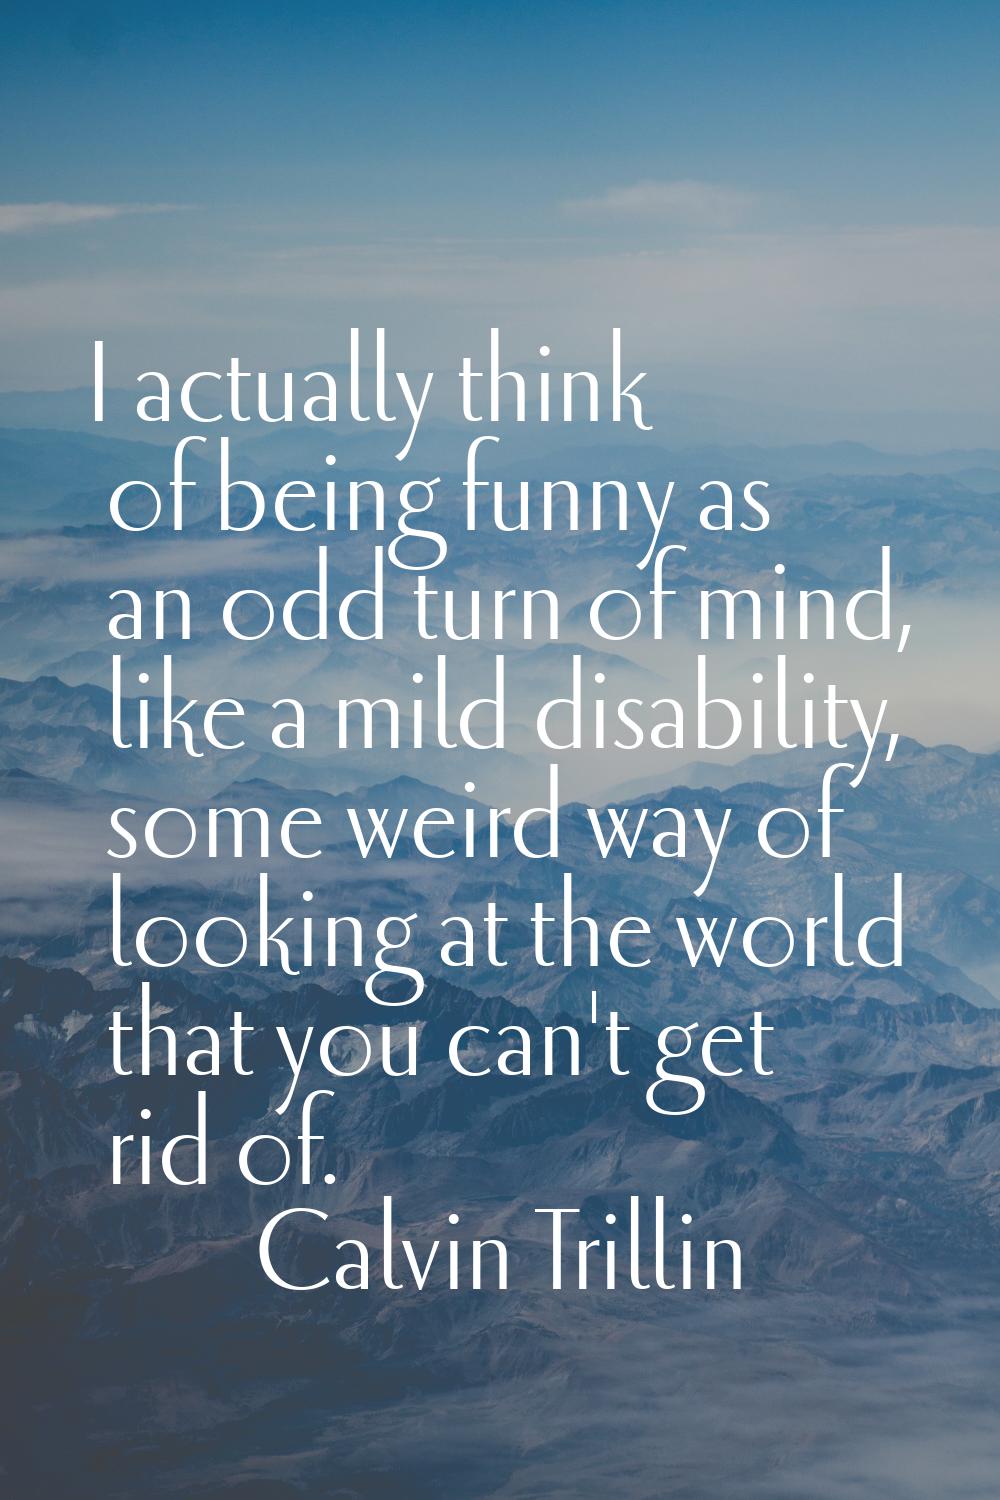 I actually think of being funny as an odd turn of mind, like a mild disability, some weird way of l